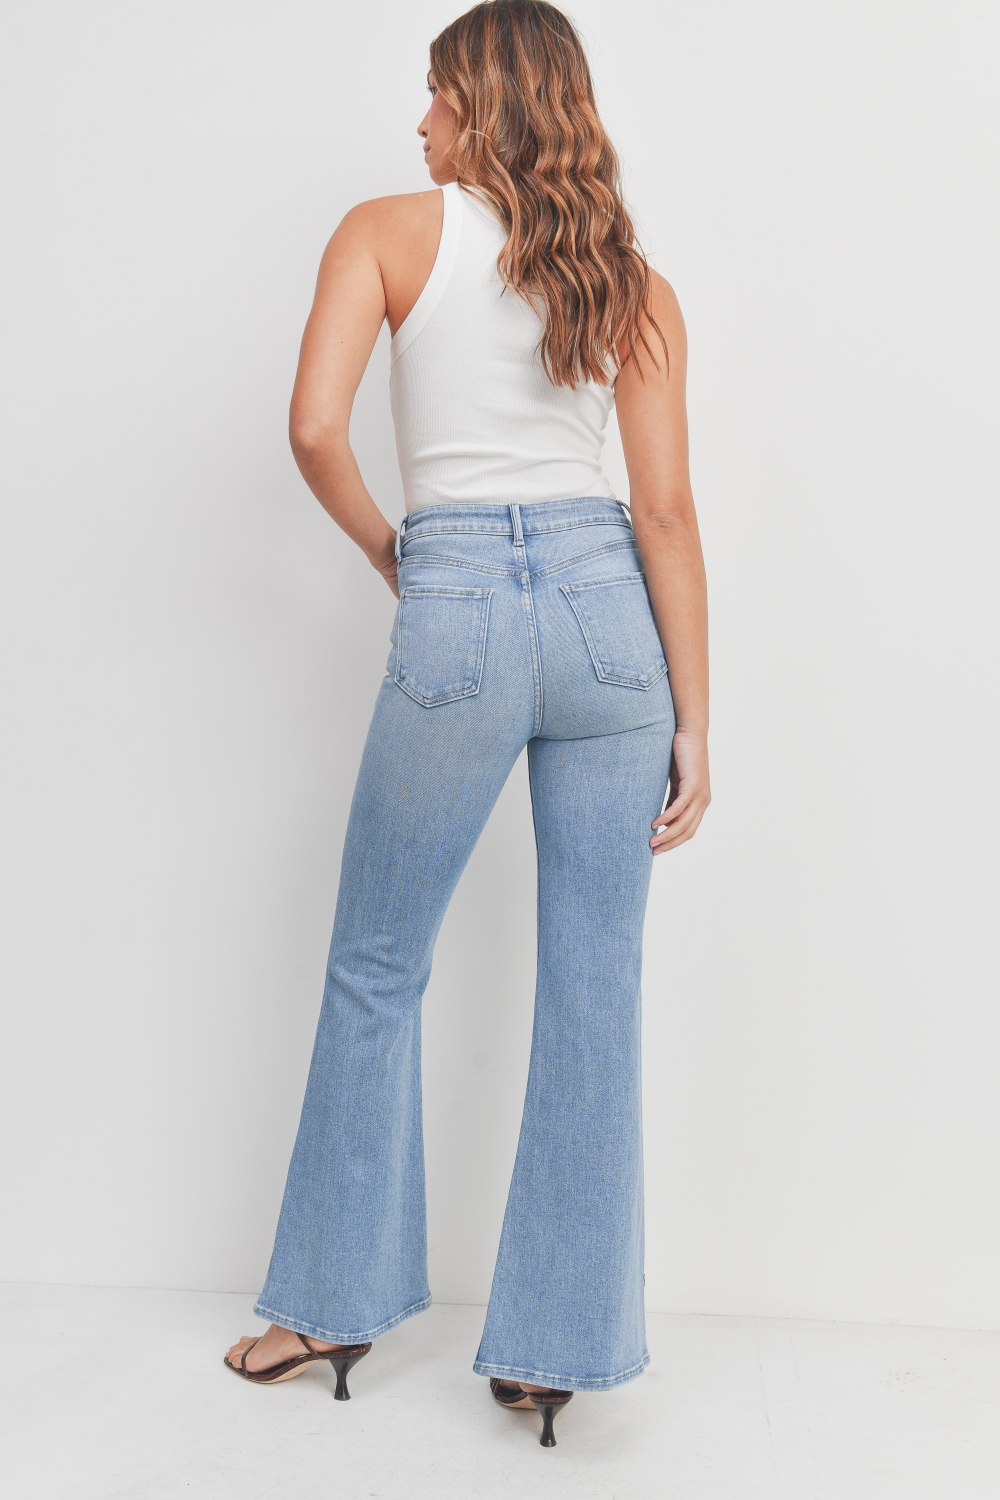 retro top with flared pants | Flare jeans style, Bell bottom jeans outfit,  Flared pants outfit